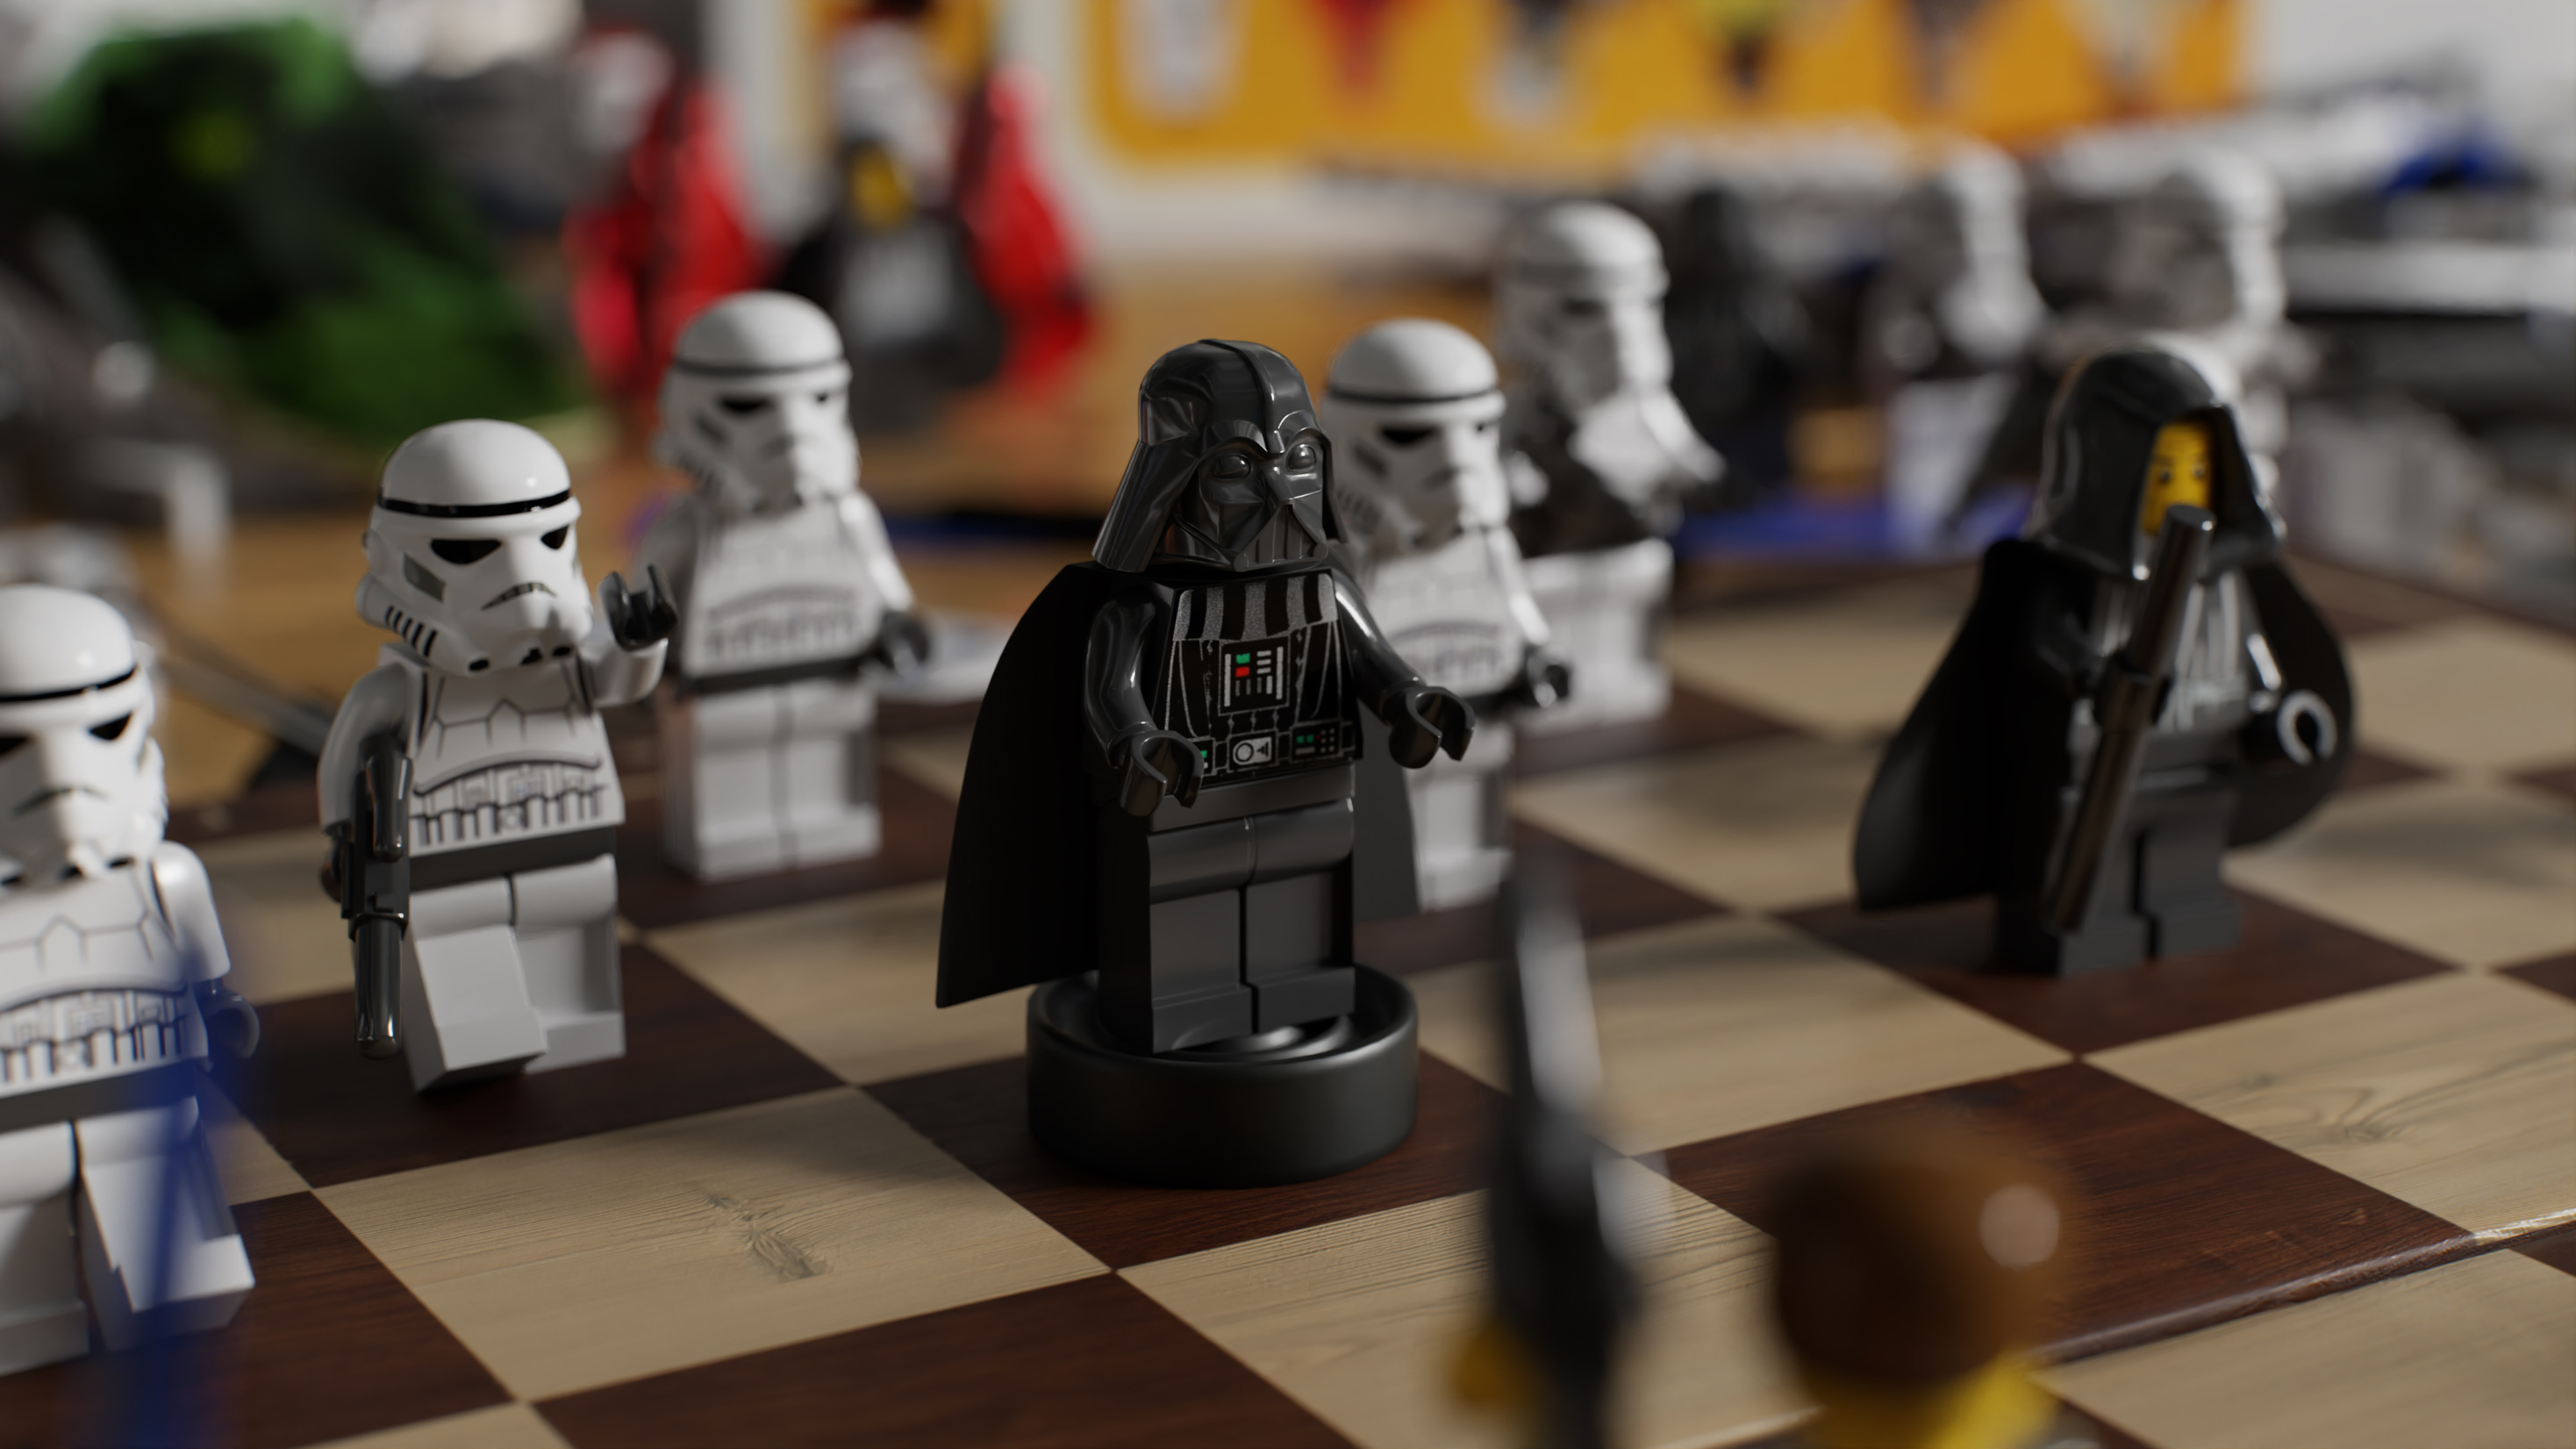 General 3840x2160 Star Wars toys chess board games LEGO Darth Vader Star Wars Villains movie characters